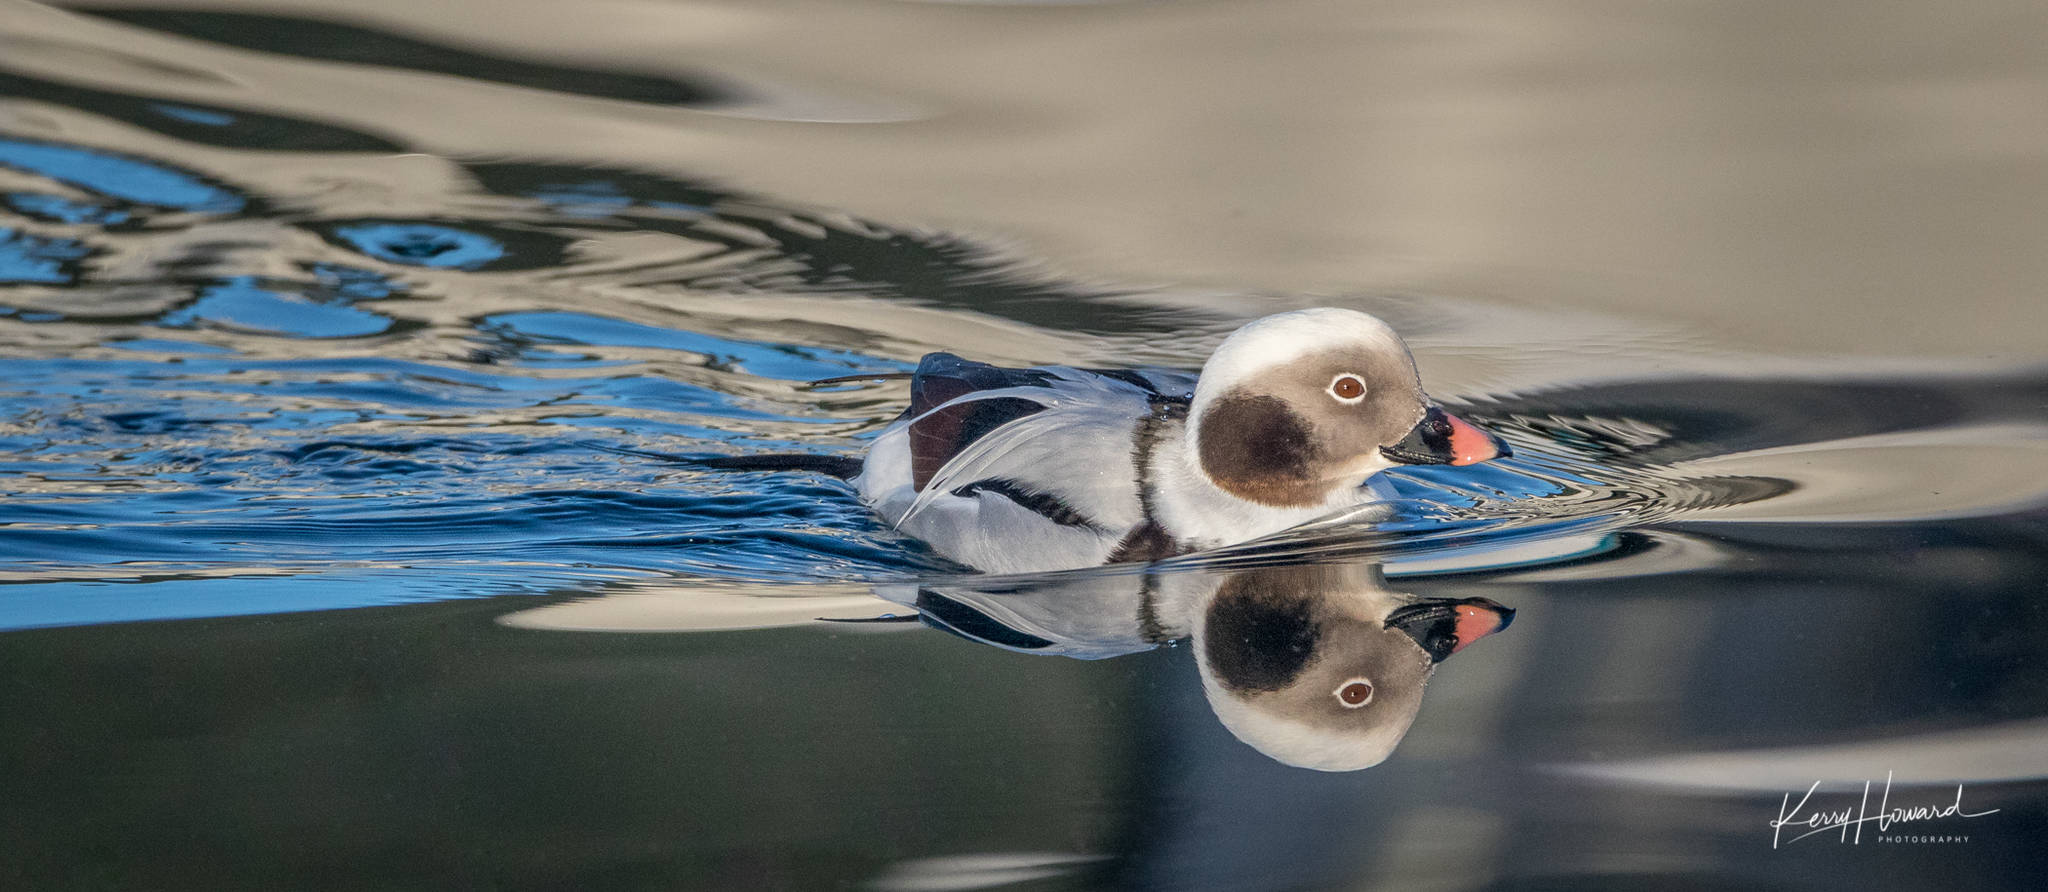 A long-tailed duck cruises in the harbor. (Photo by Kerry Howard)